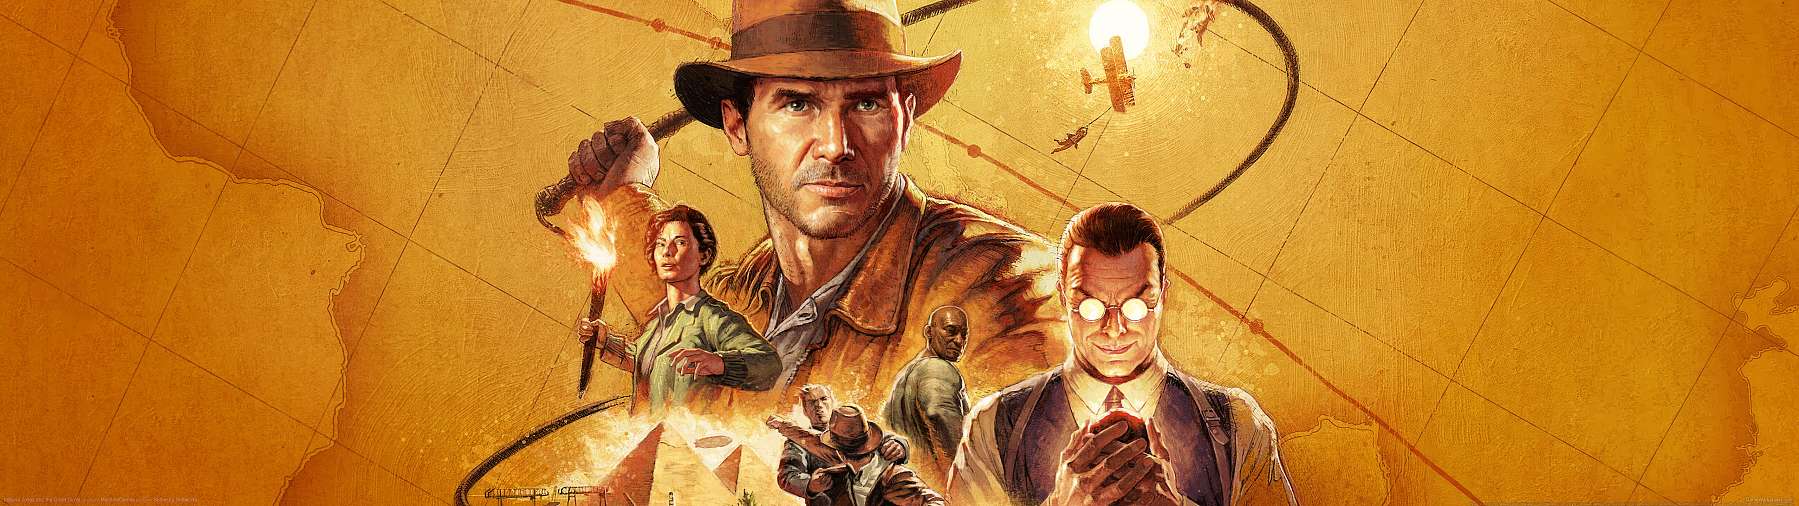 Indiana Jones and the Great Circle wallpaper or background